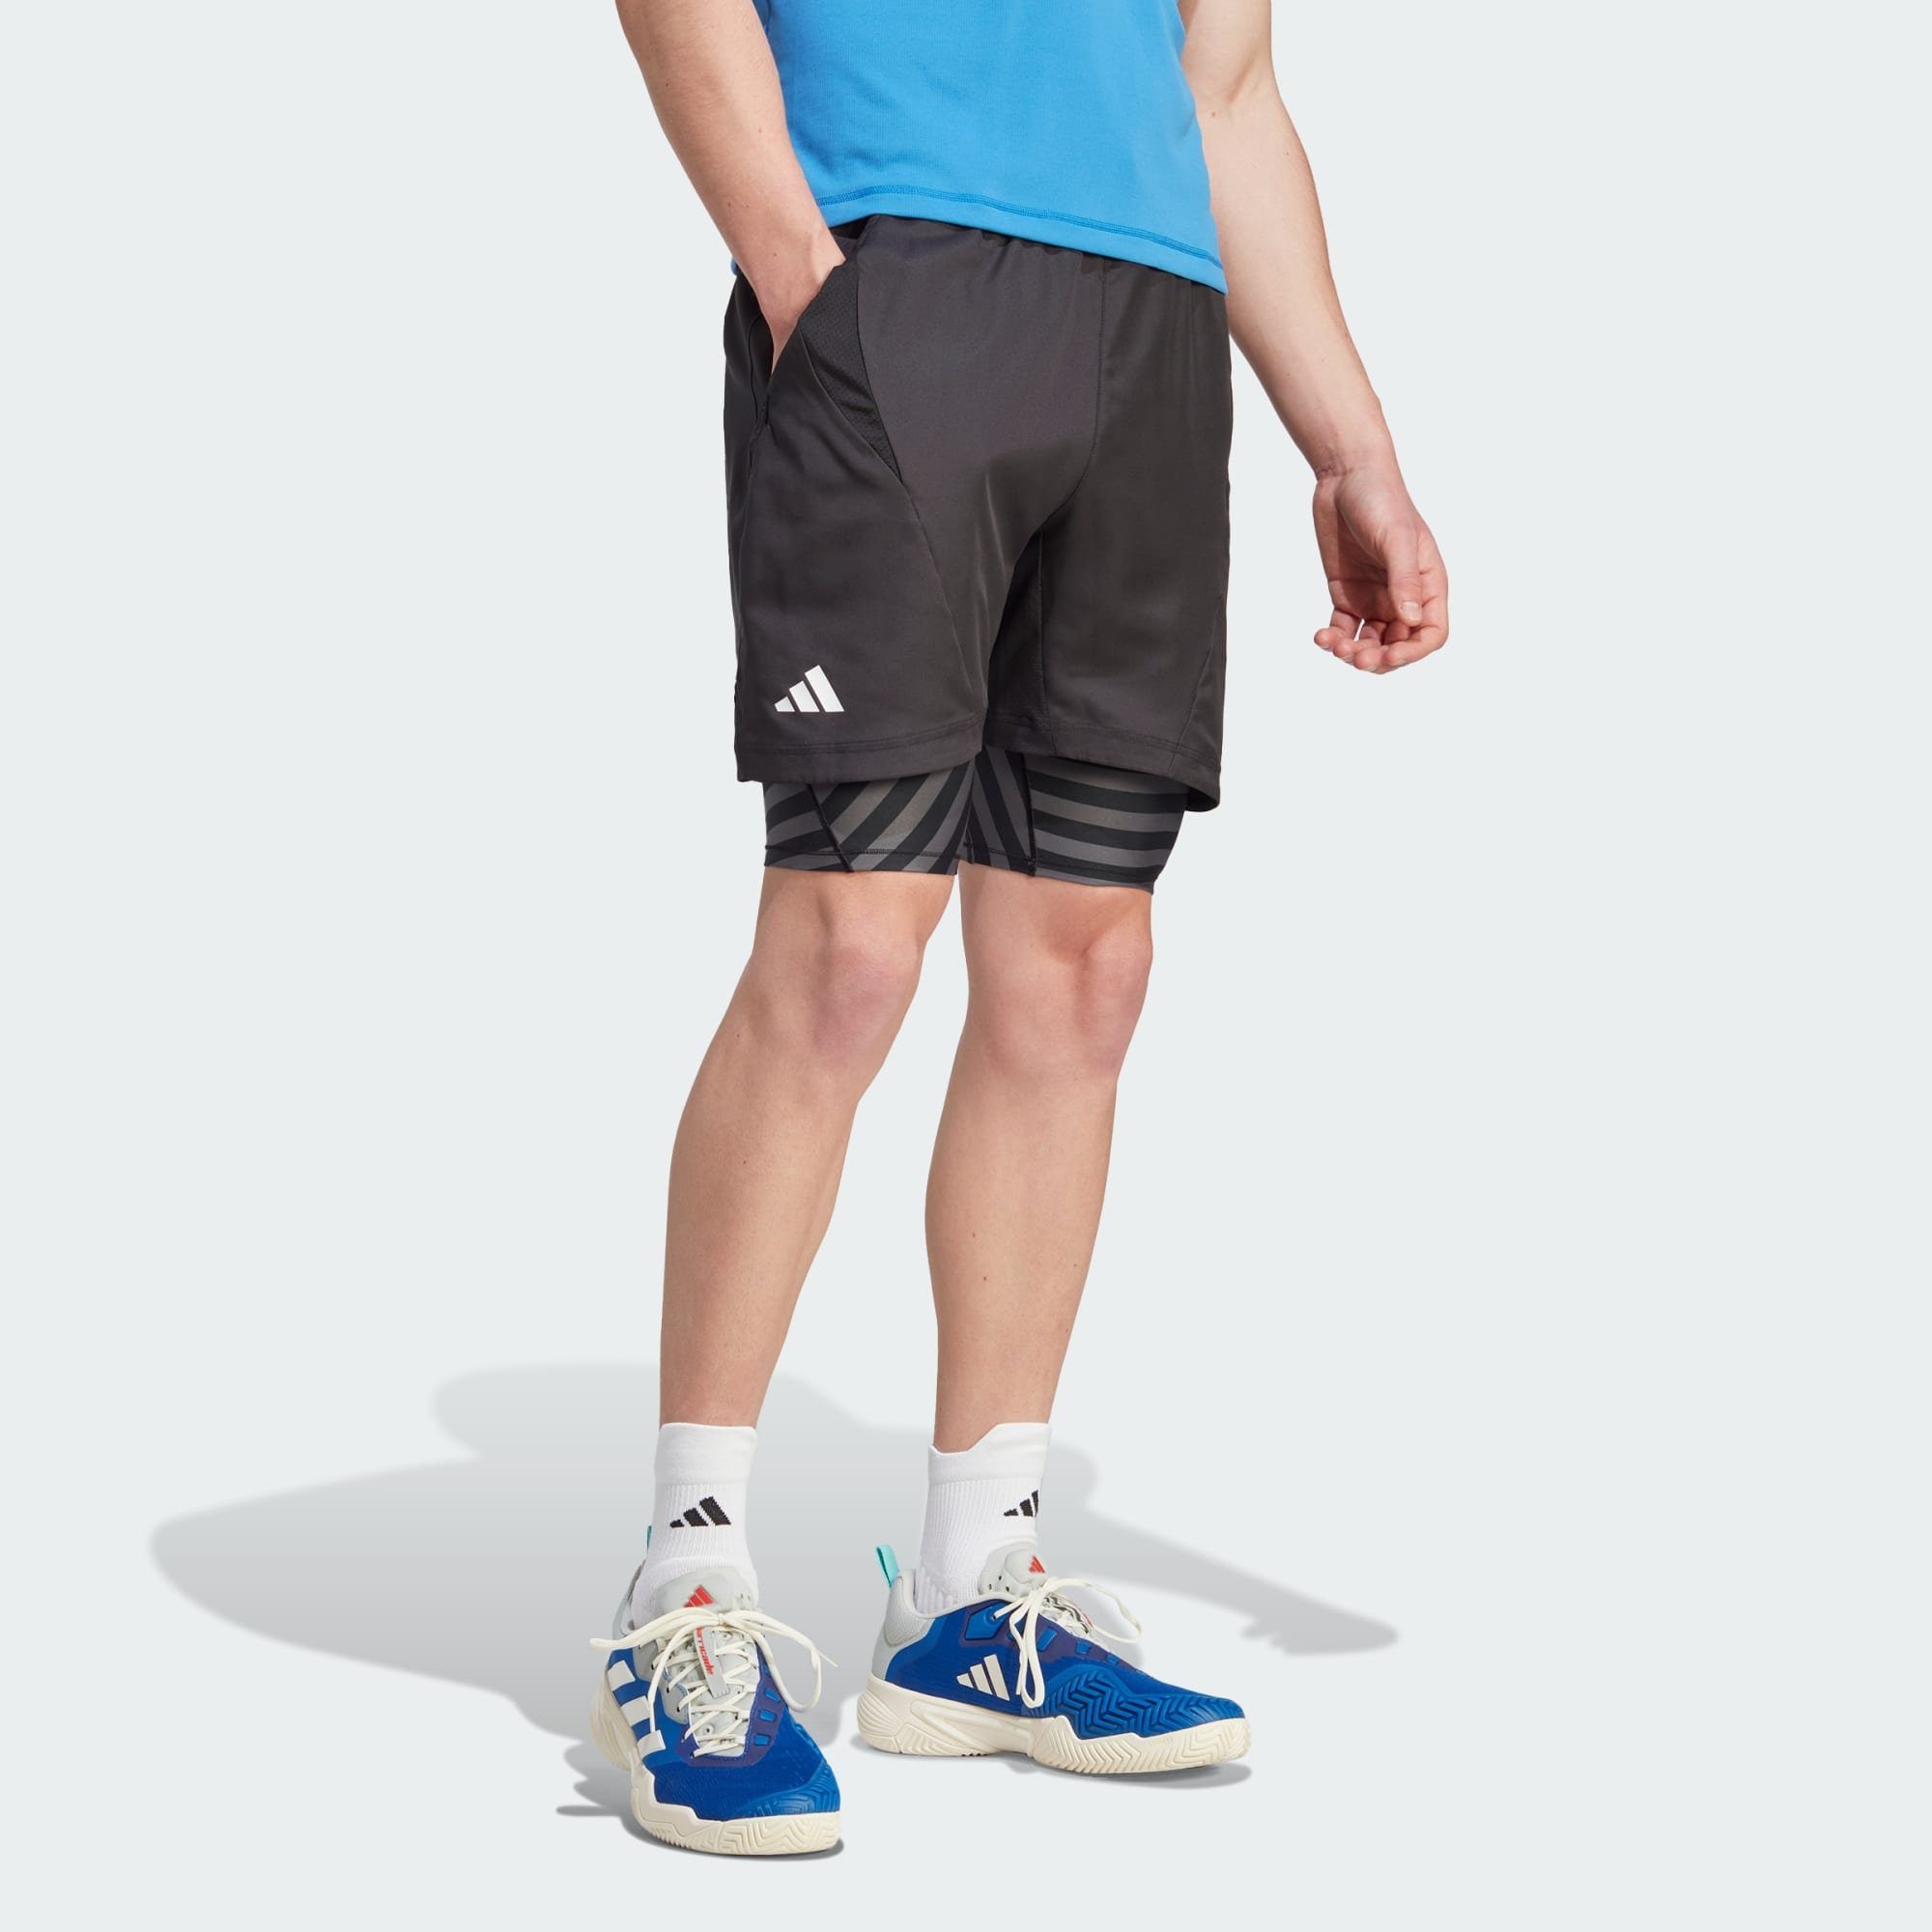 adidas Funktionsshorts PRO TWO-IN-ONE Black TENNIS Performance AEROREADY SHORTS